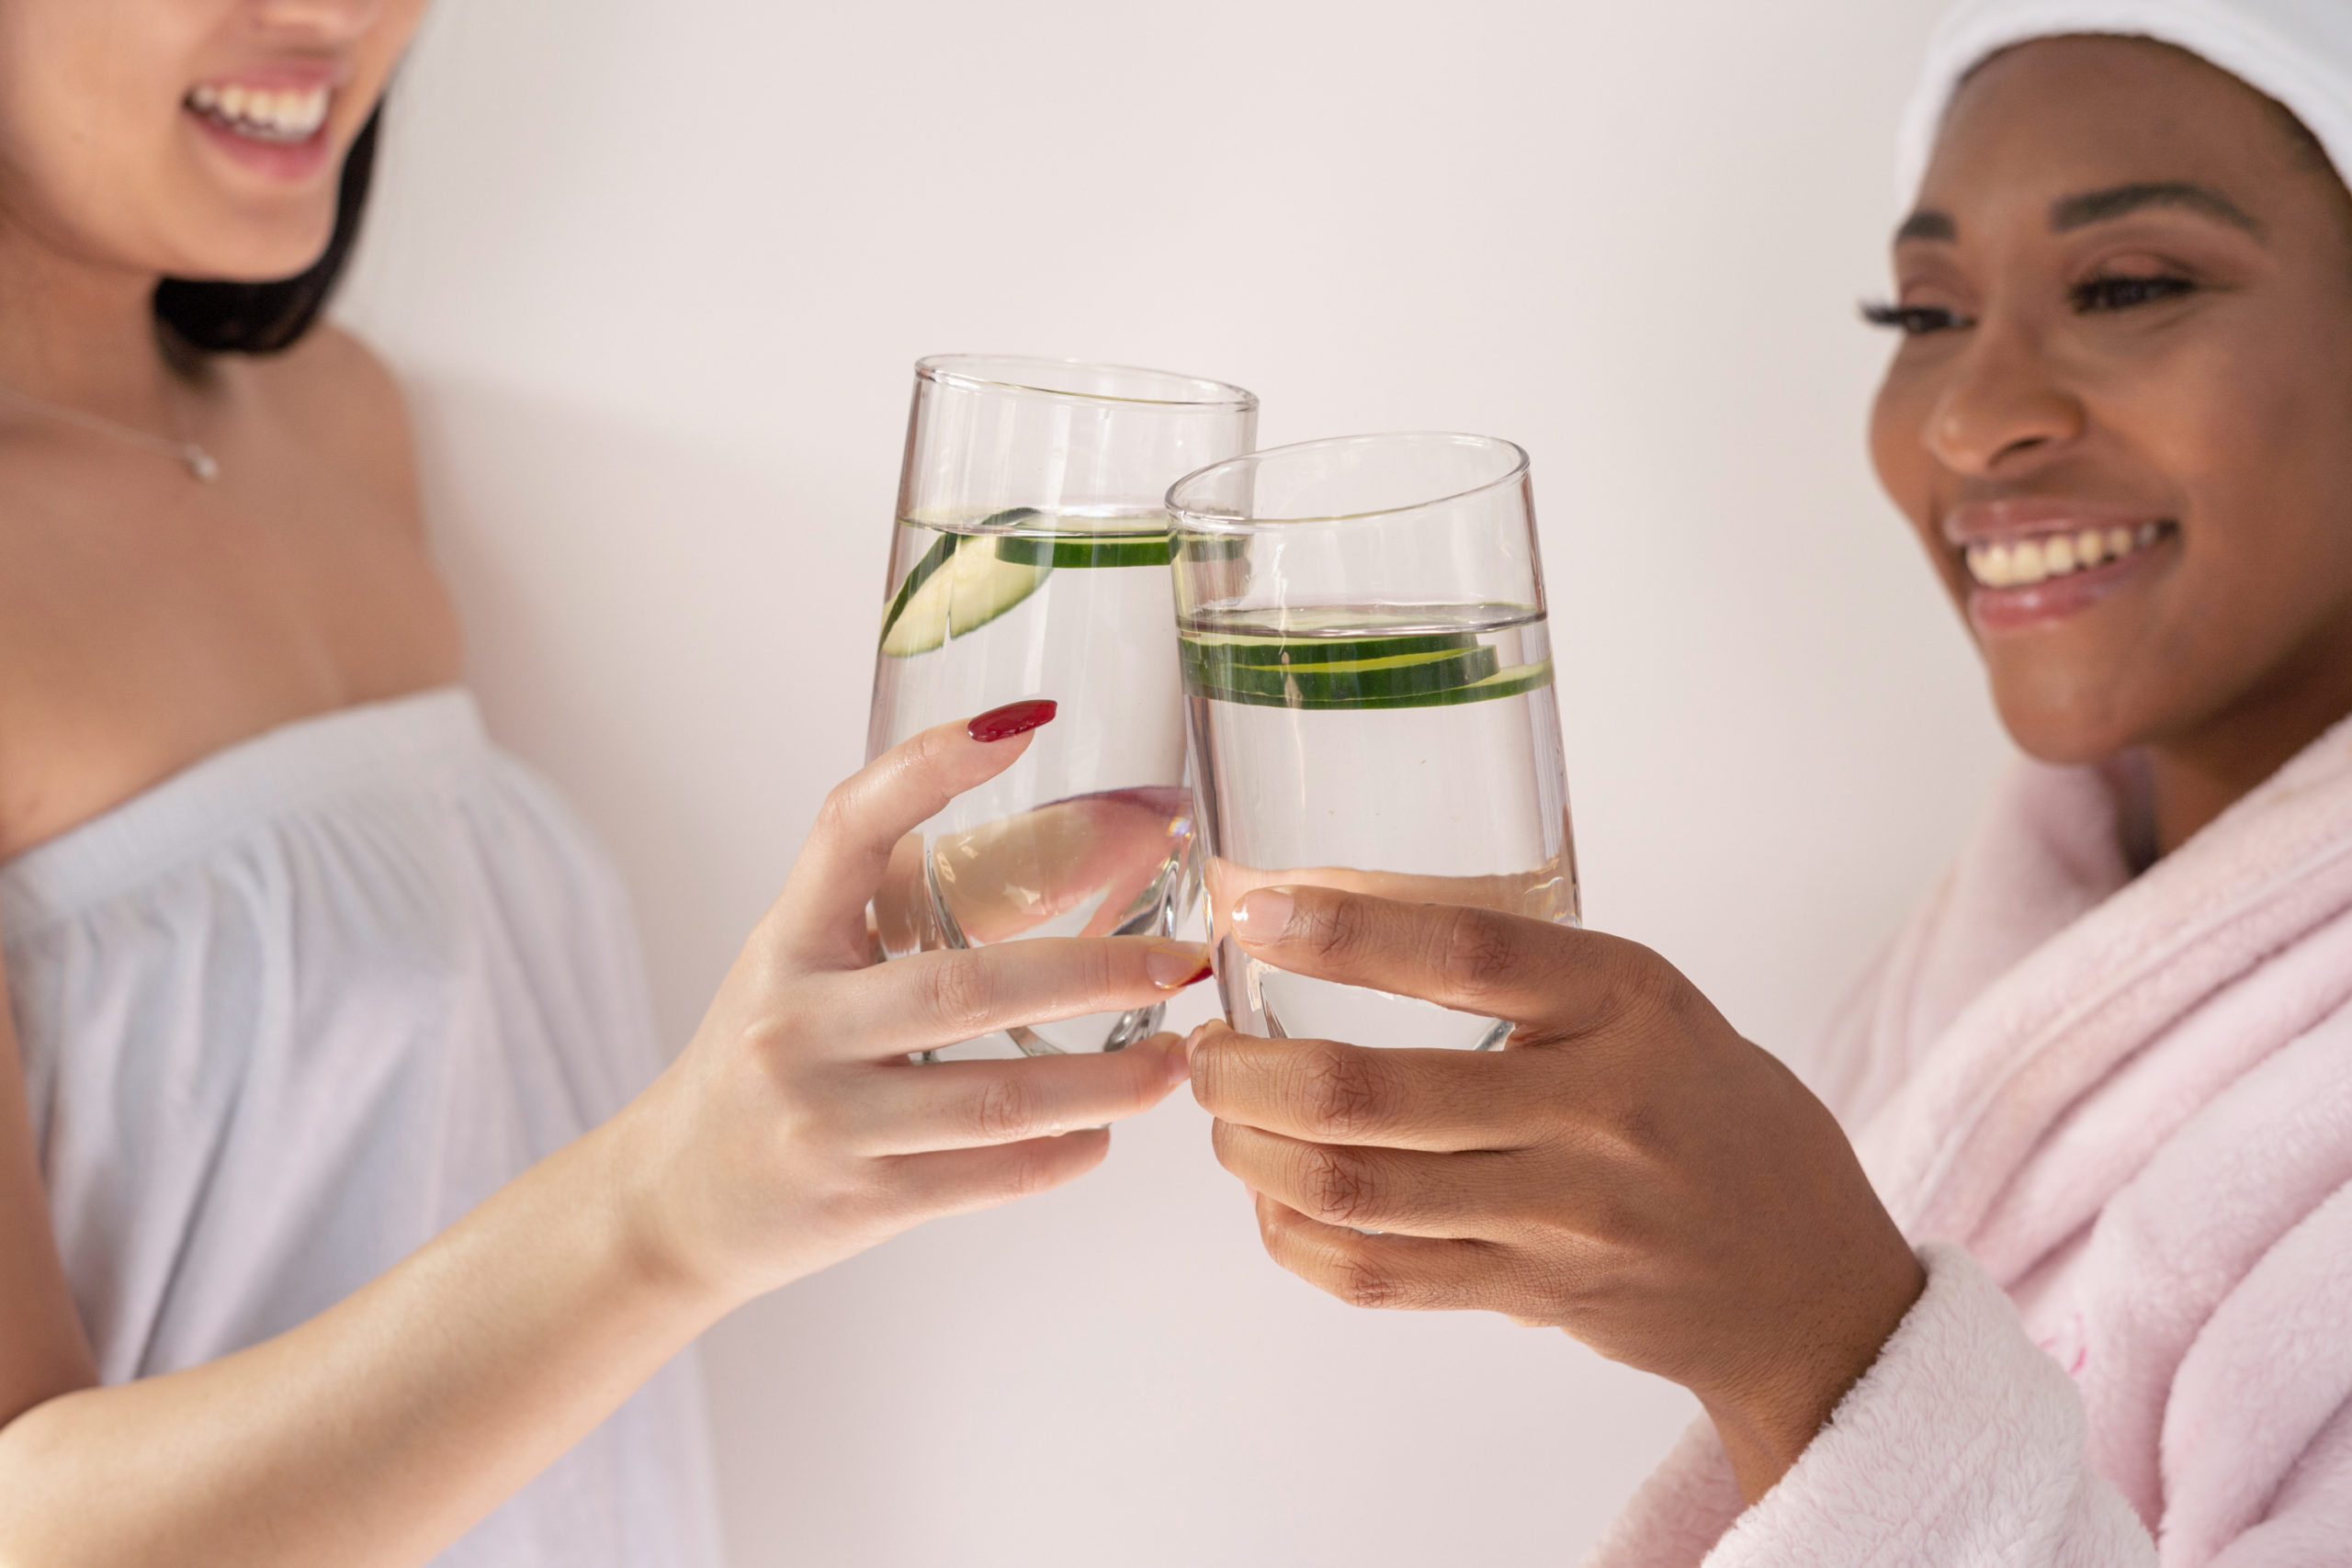 Two friends in spa mood laughing and making a toast with a glass of water with cucumber slices inside